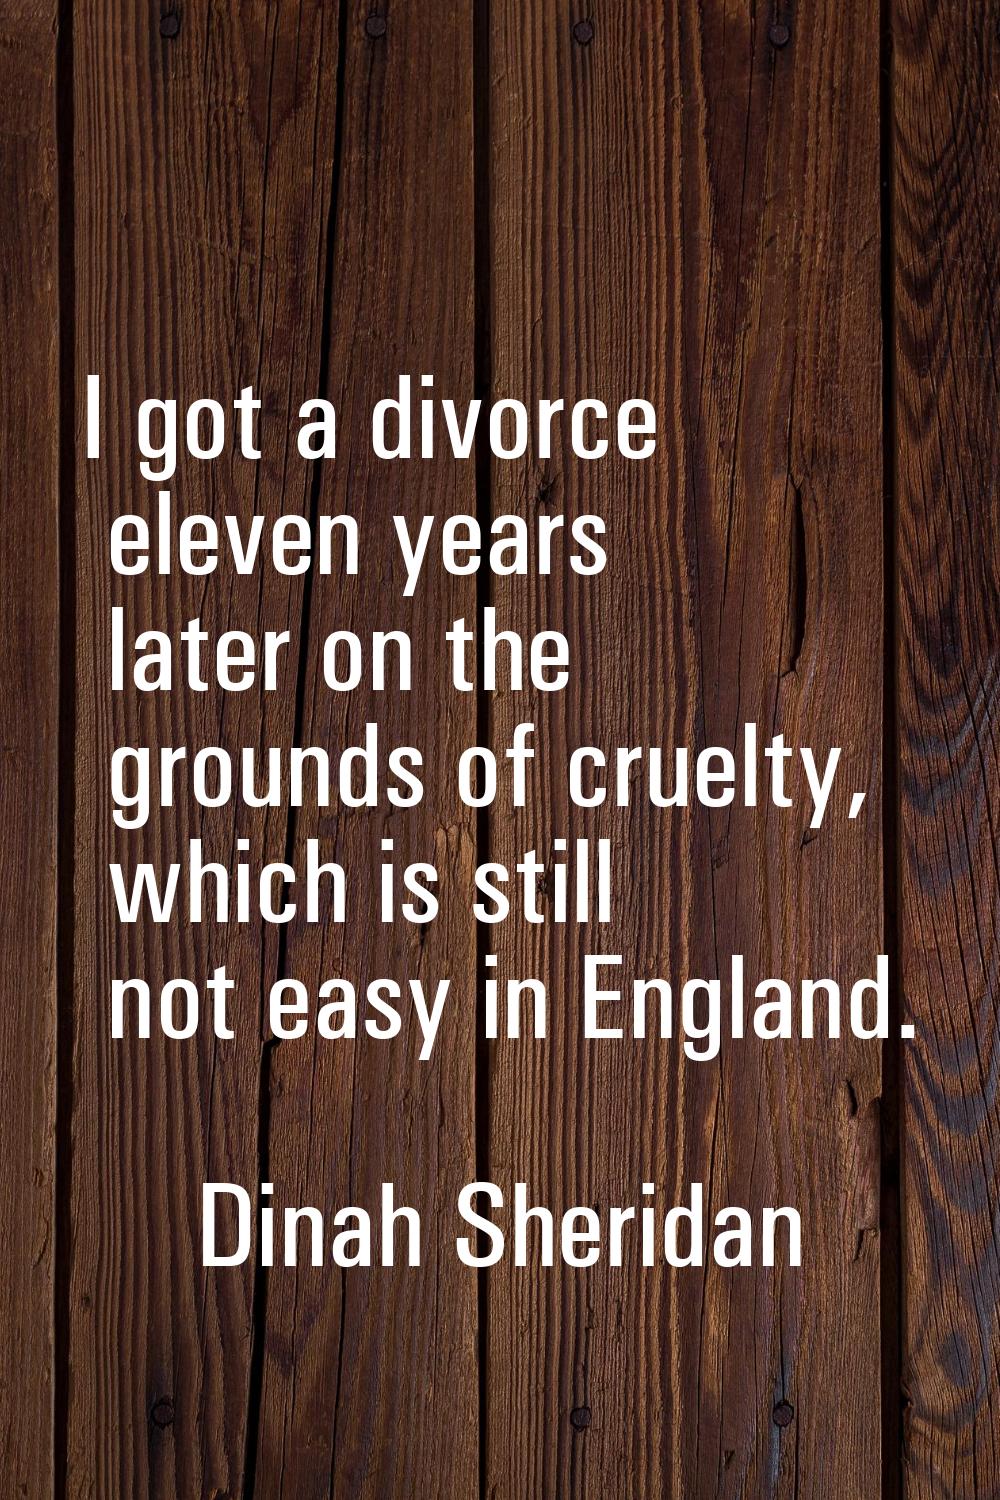 I got a divorce eleven years later on the grounds of cruelty, which is still not easy in England.